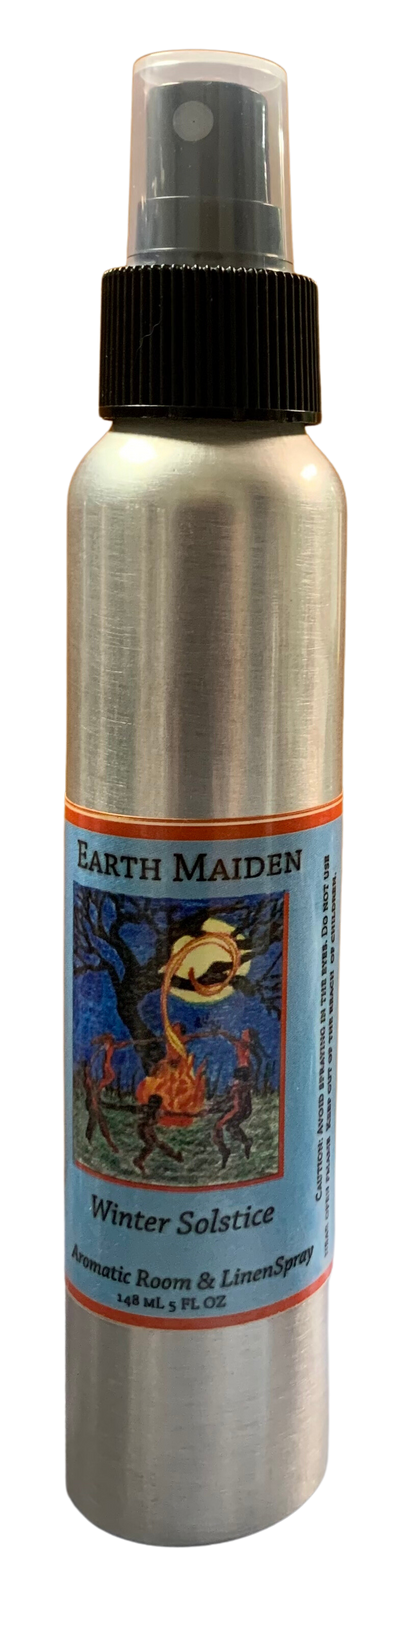 All Natural “Winter Solstice” Aroma Mist with Fir Needle, Frankincense, Juniper Berry, West Indian Bay, Cedarwood Atlas, Peppermint, Clove Bud, Cassia Essential Oils in 5-ounce metal bullet container with fine mist sprayer.